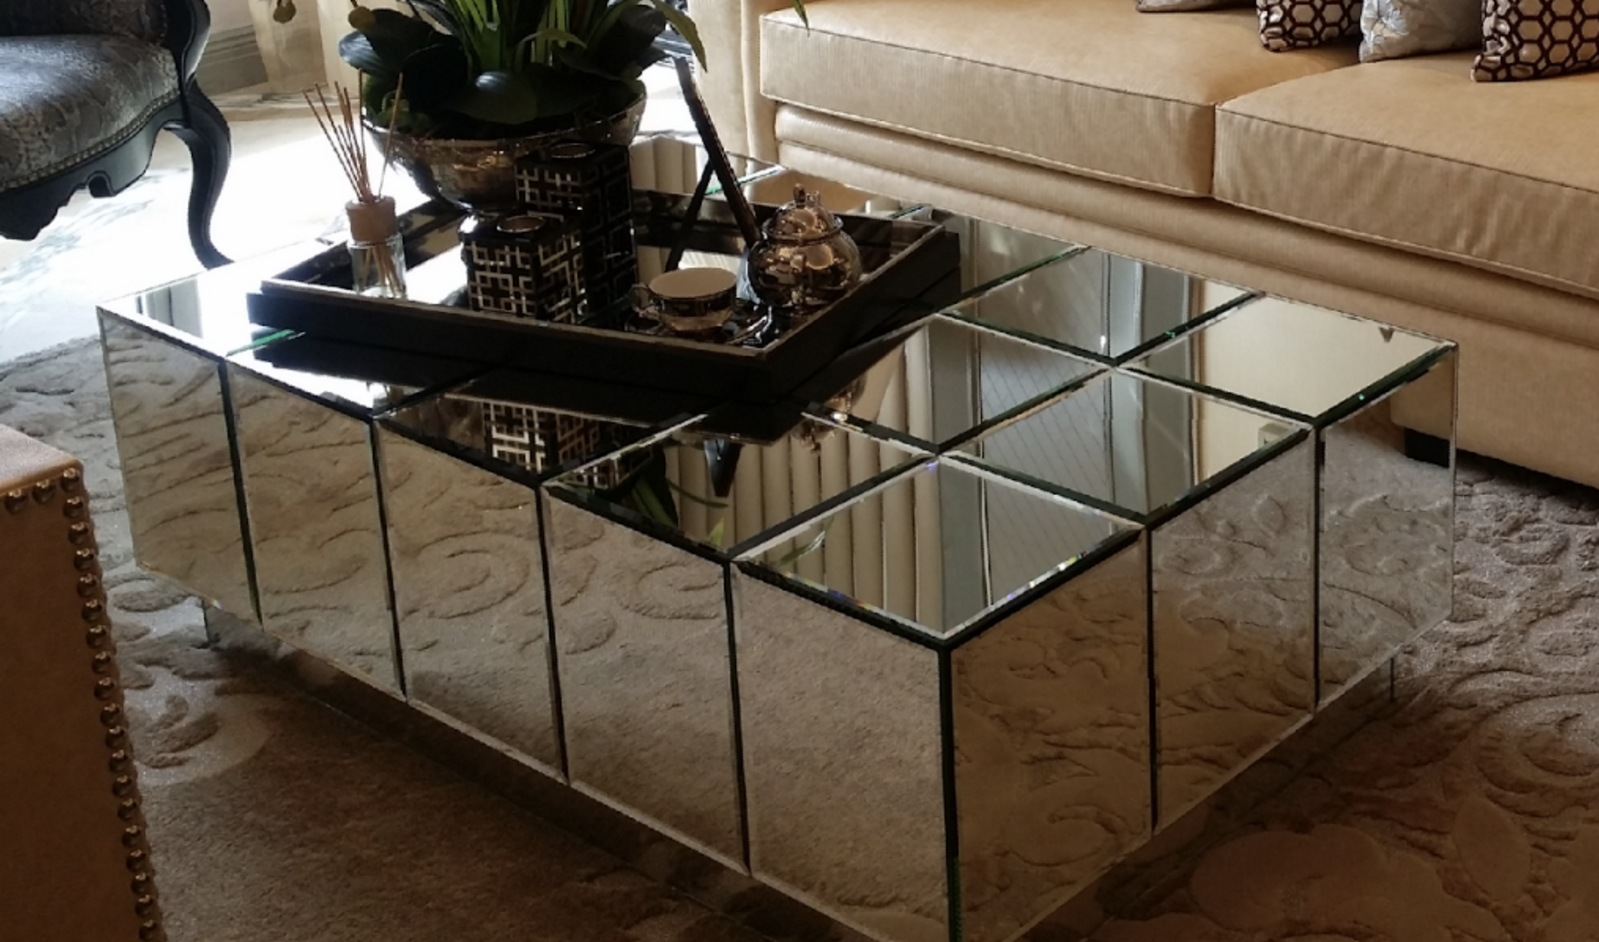 Block Mirrored Coffee Table Brisbane, Mirrored Coffee Table Set With Drawers